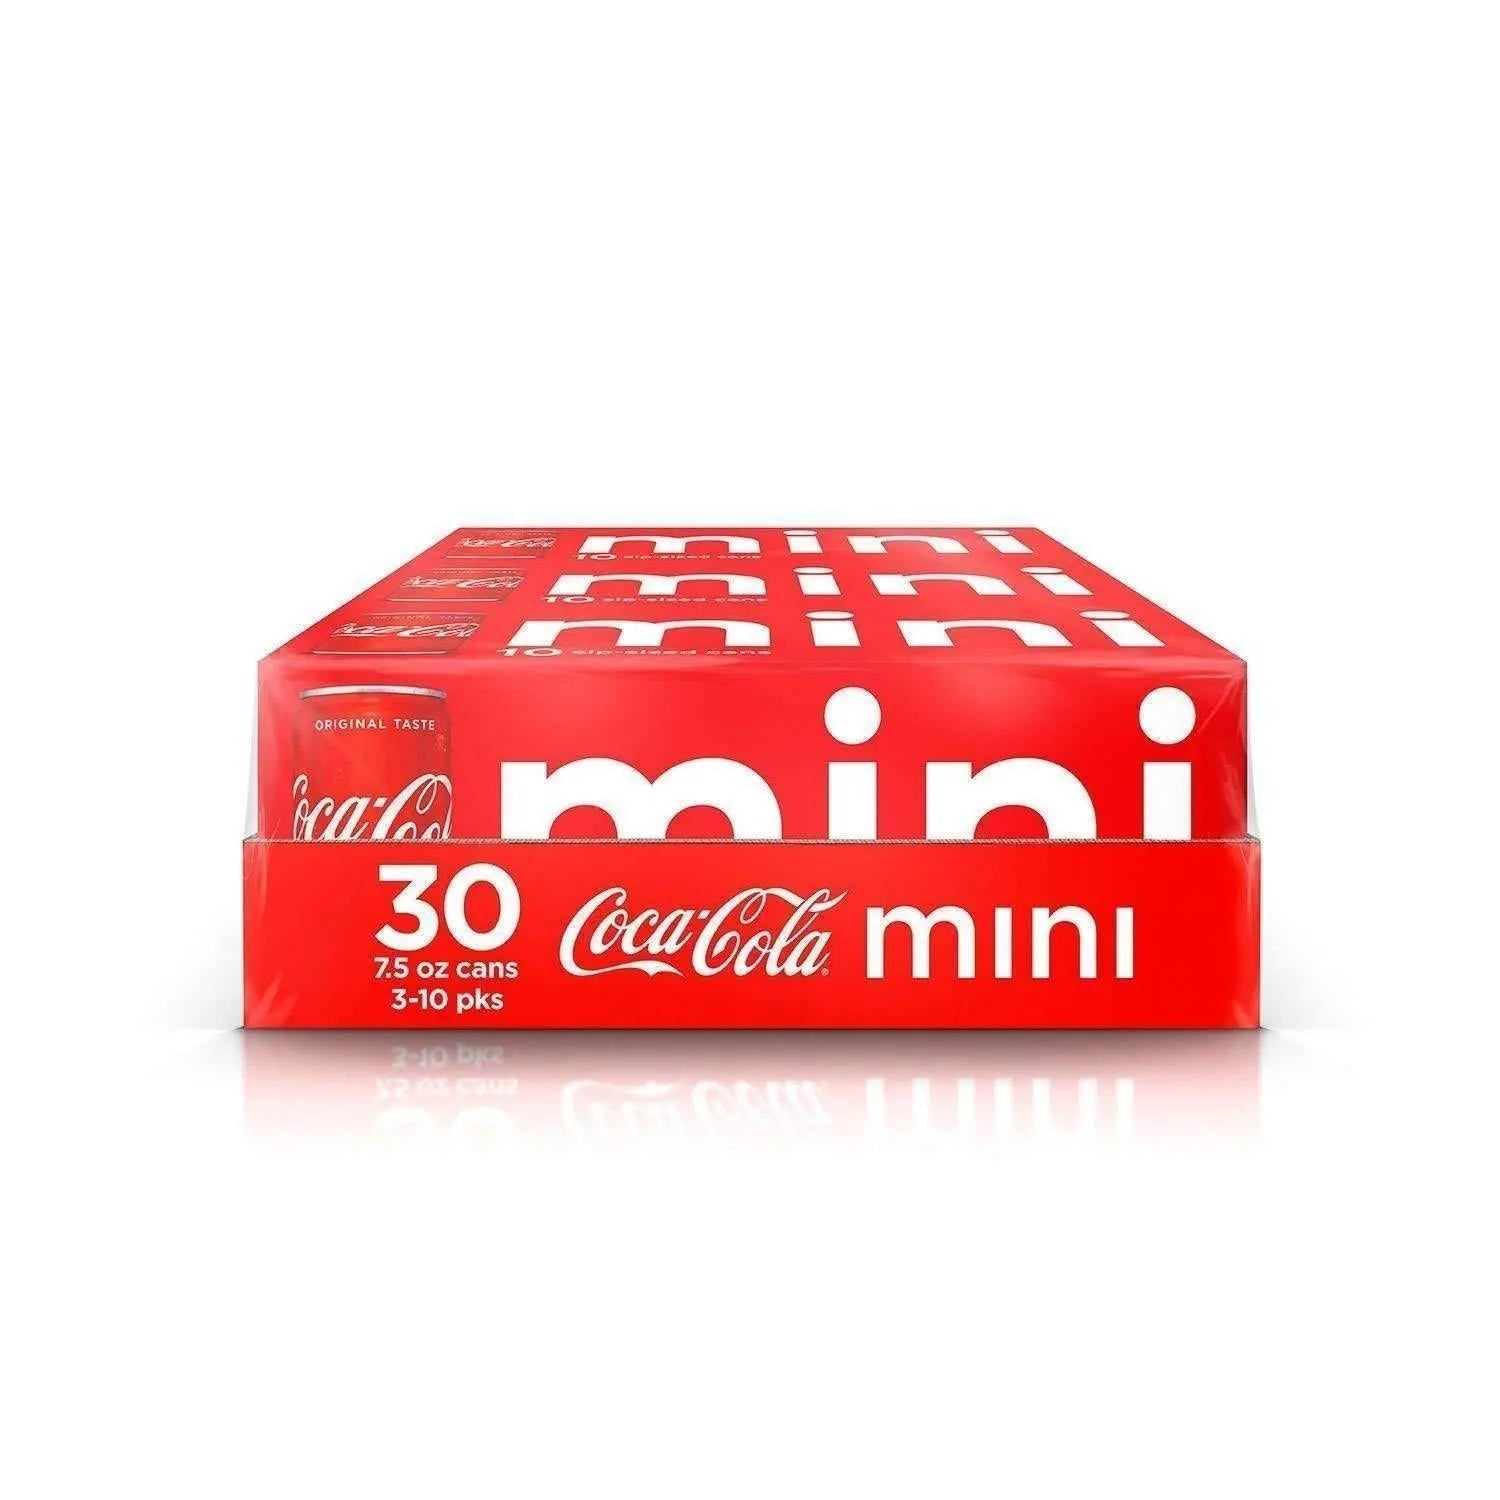 Wholesale prices with free shipping all over United States Coca-Cola Mini Cans - Steven Deals